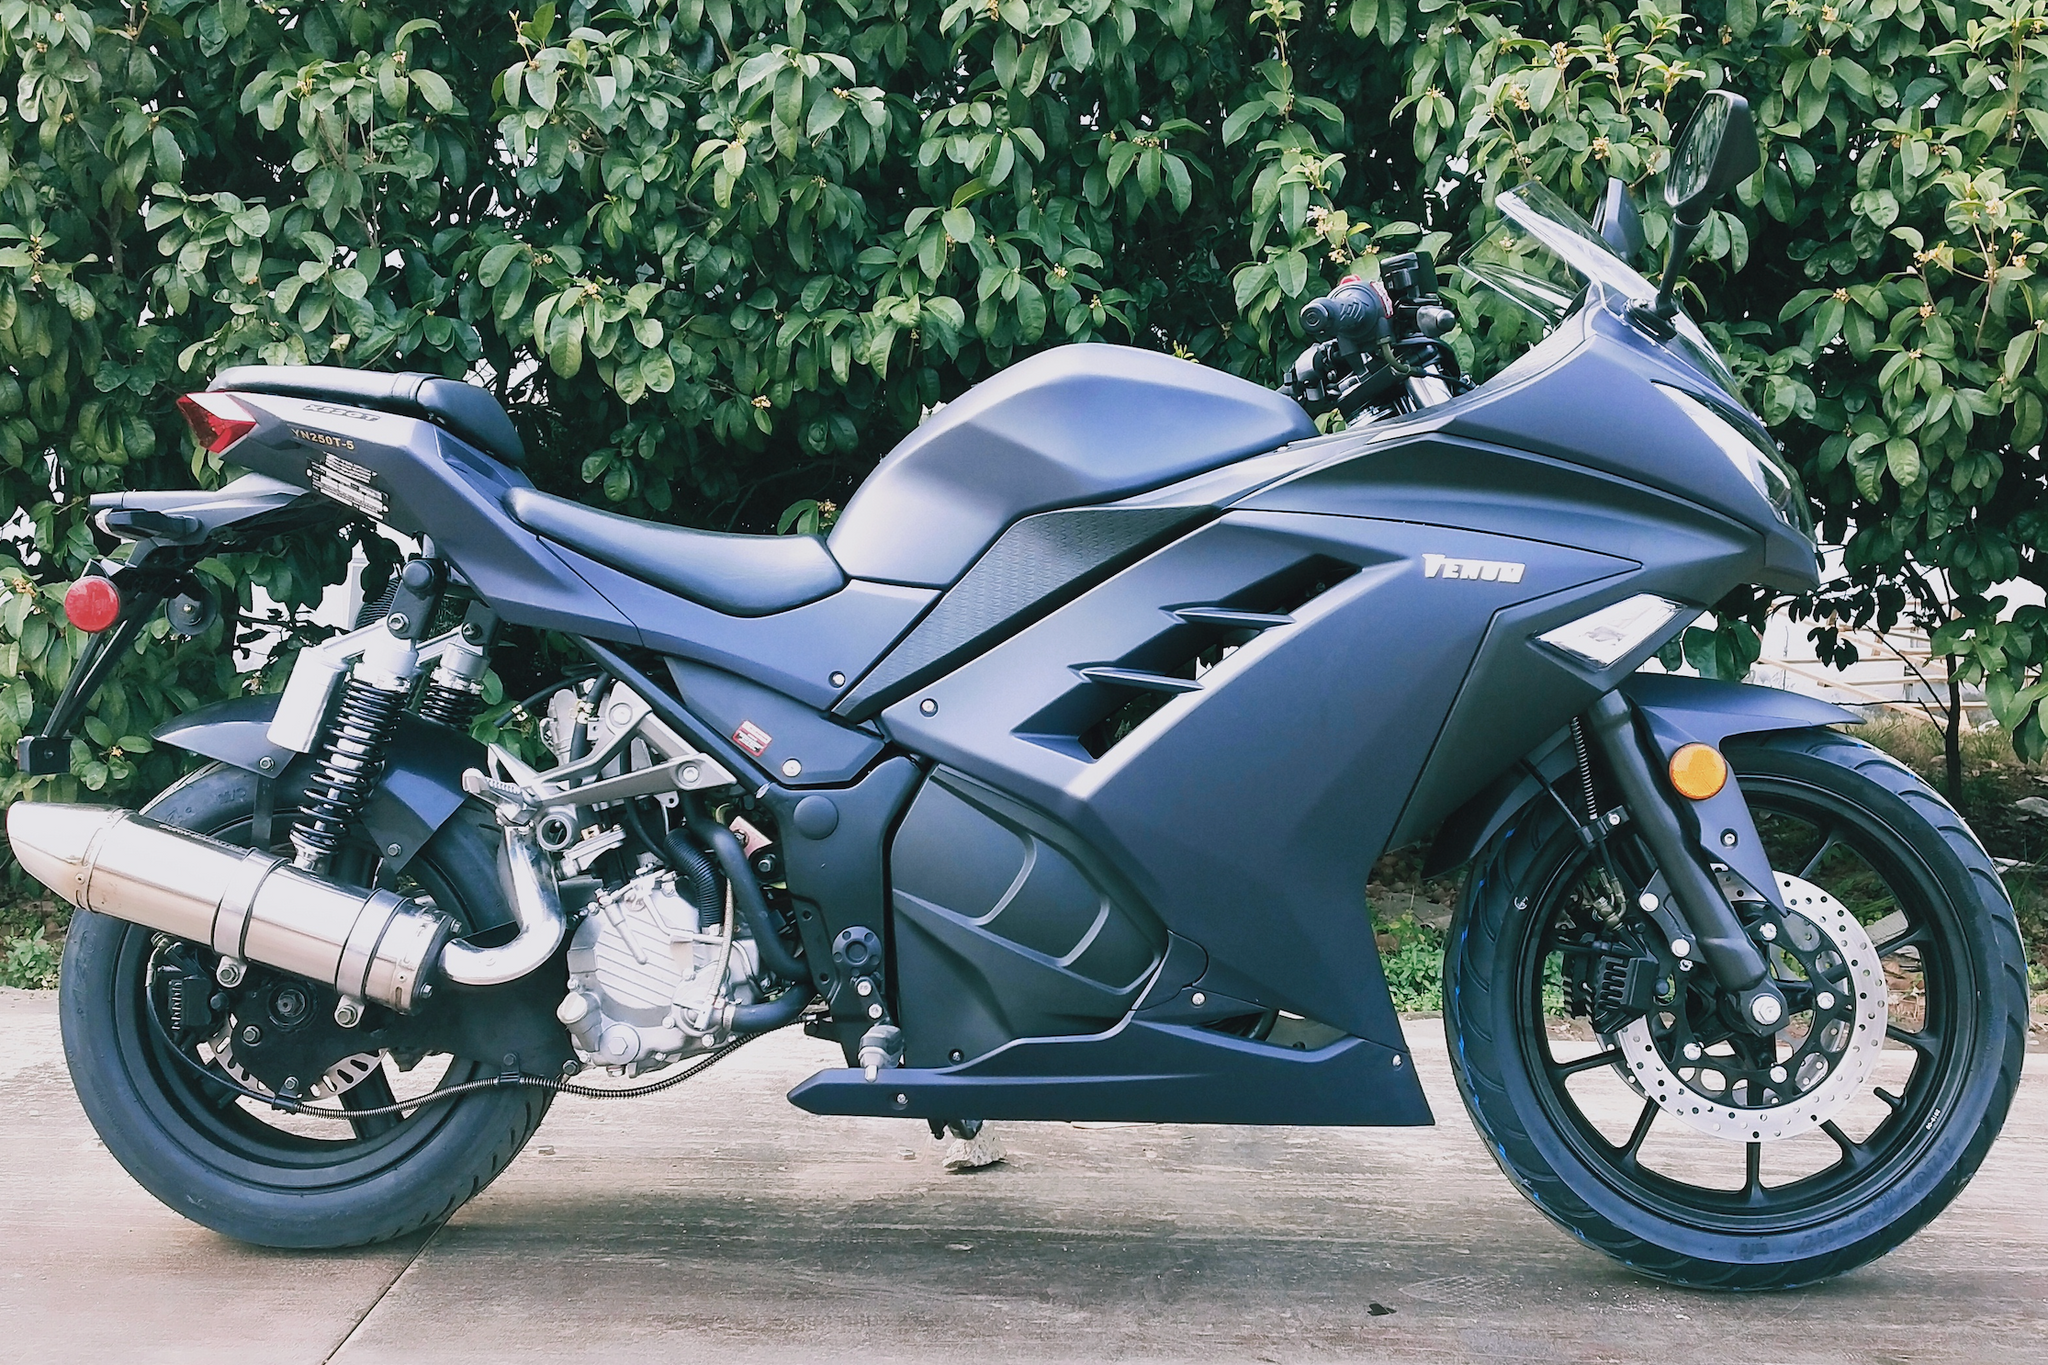 used automatic motorcycles for sale near me